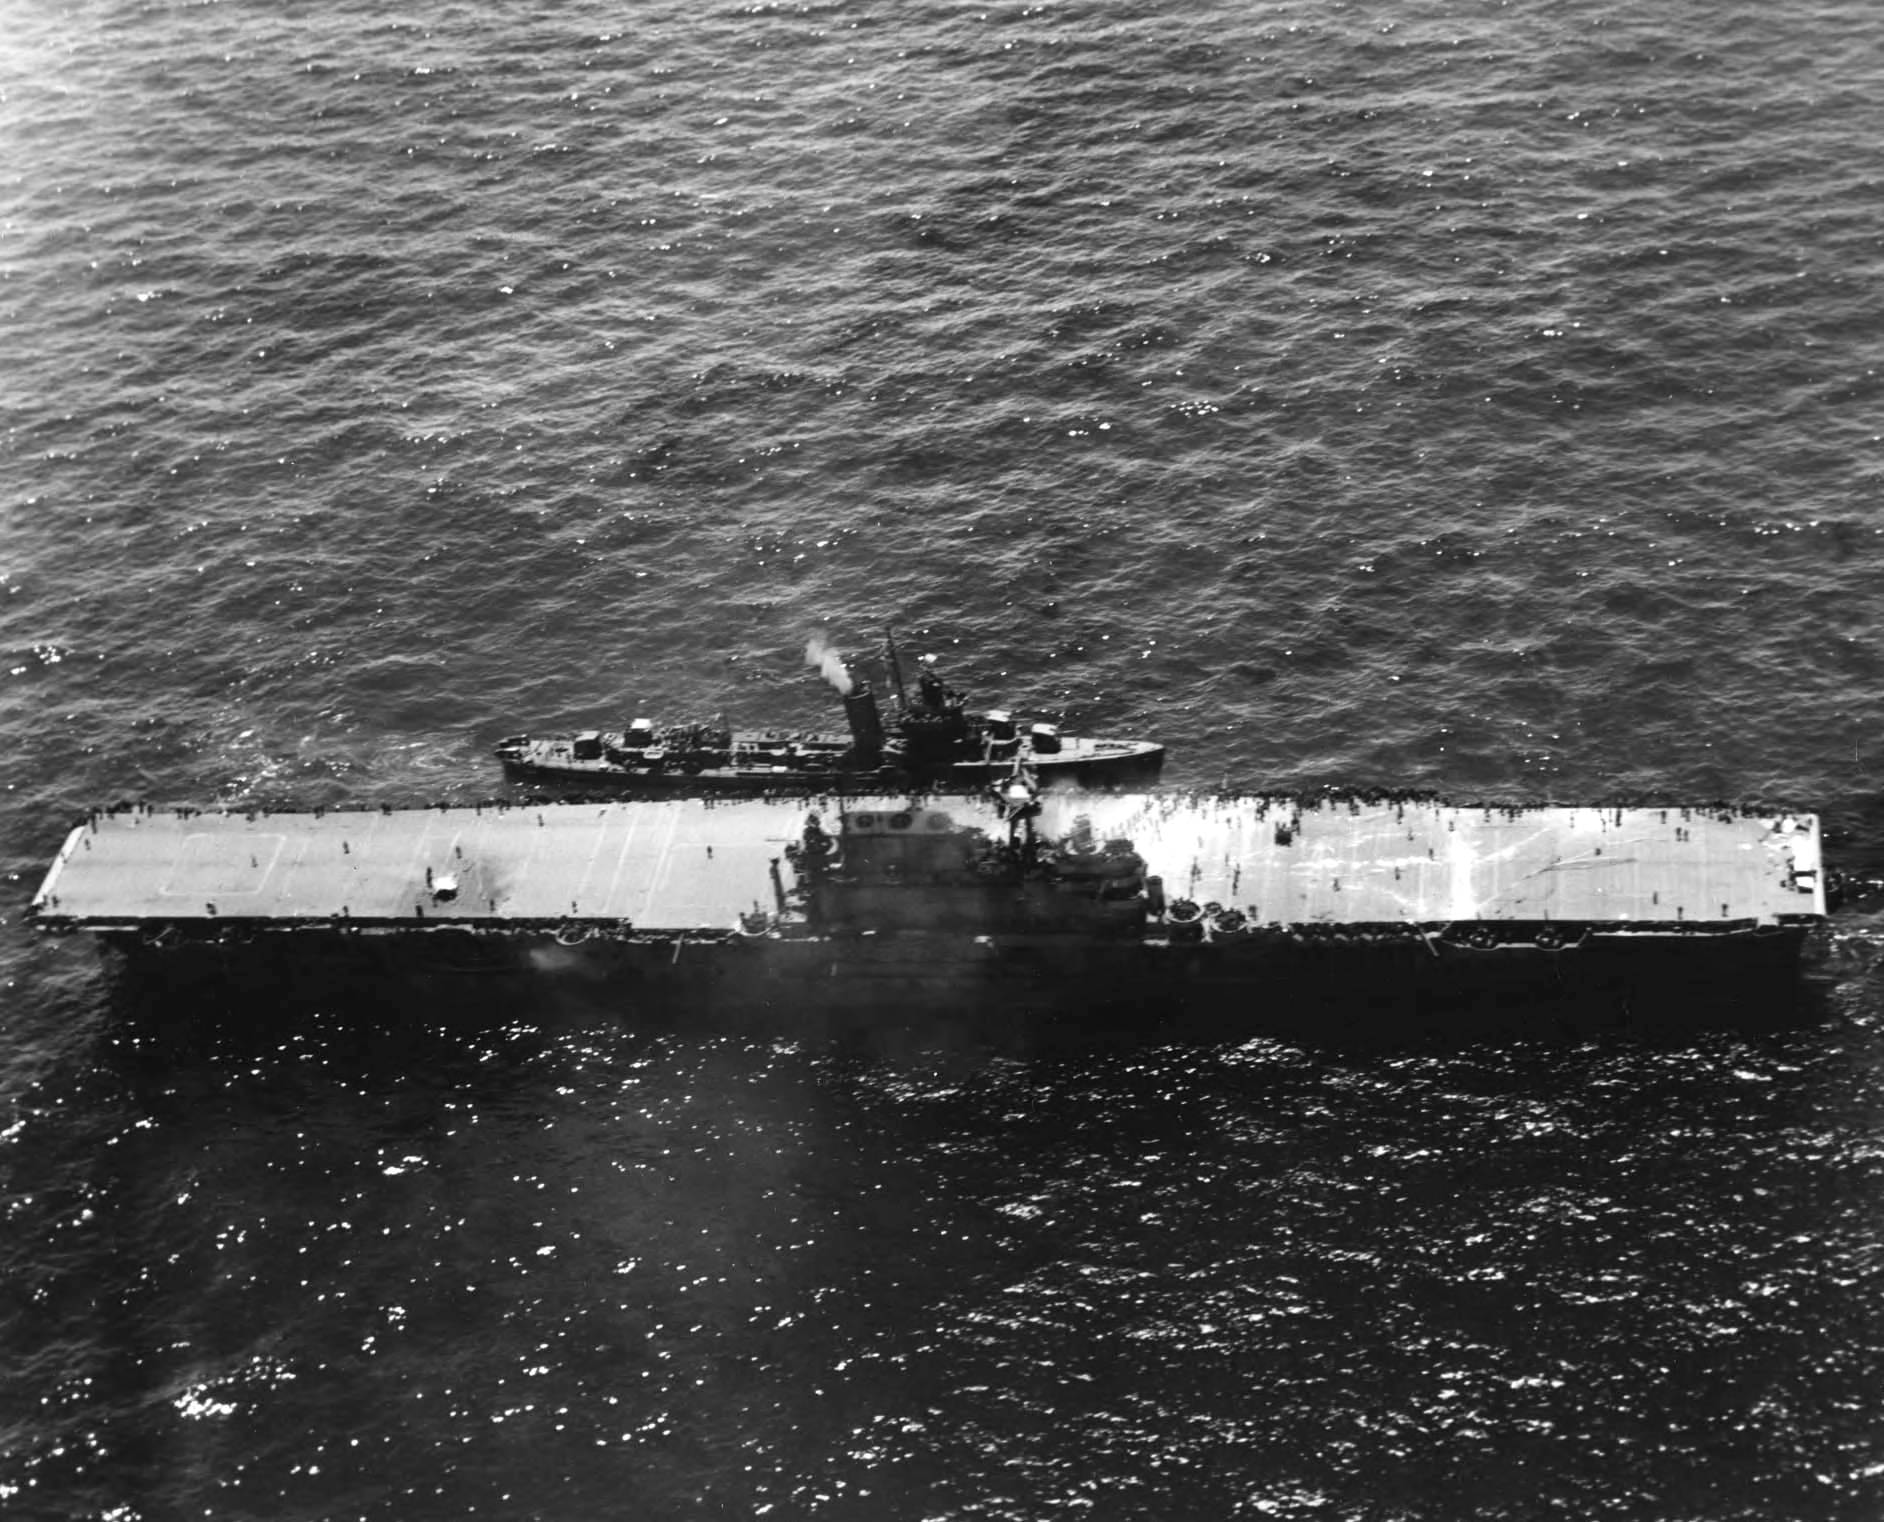 Destroyer USS Russell coming alongside the stricken USS Hornet (Yorktown-class) in one of the last photographs of the carrier before she was scuttled, Battle of Santa Cruz Islands, 26 Oct 1942.